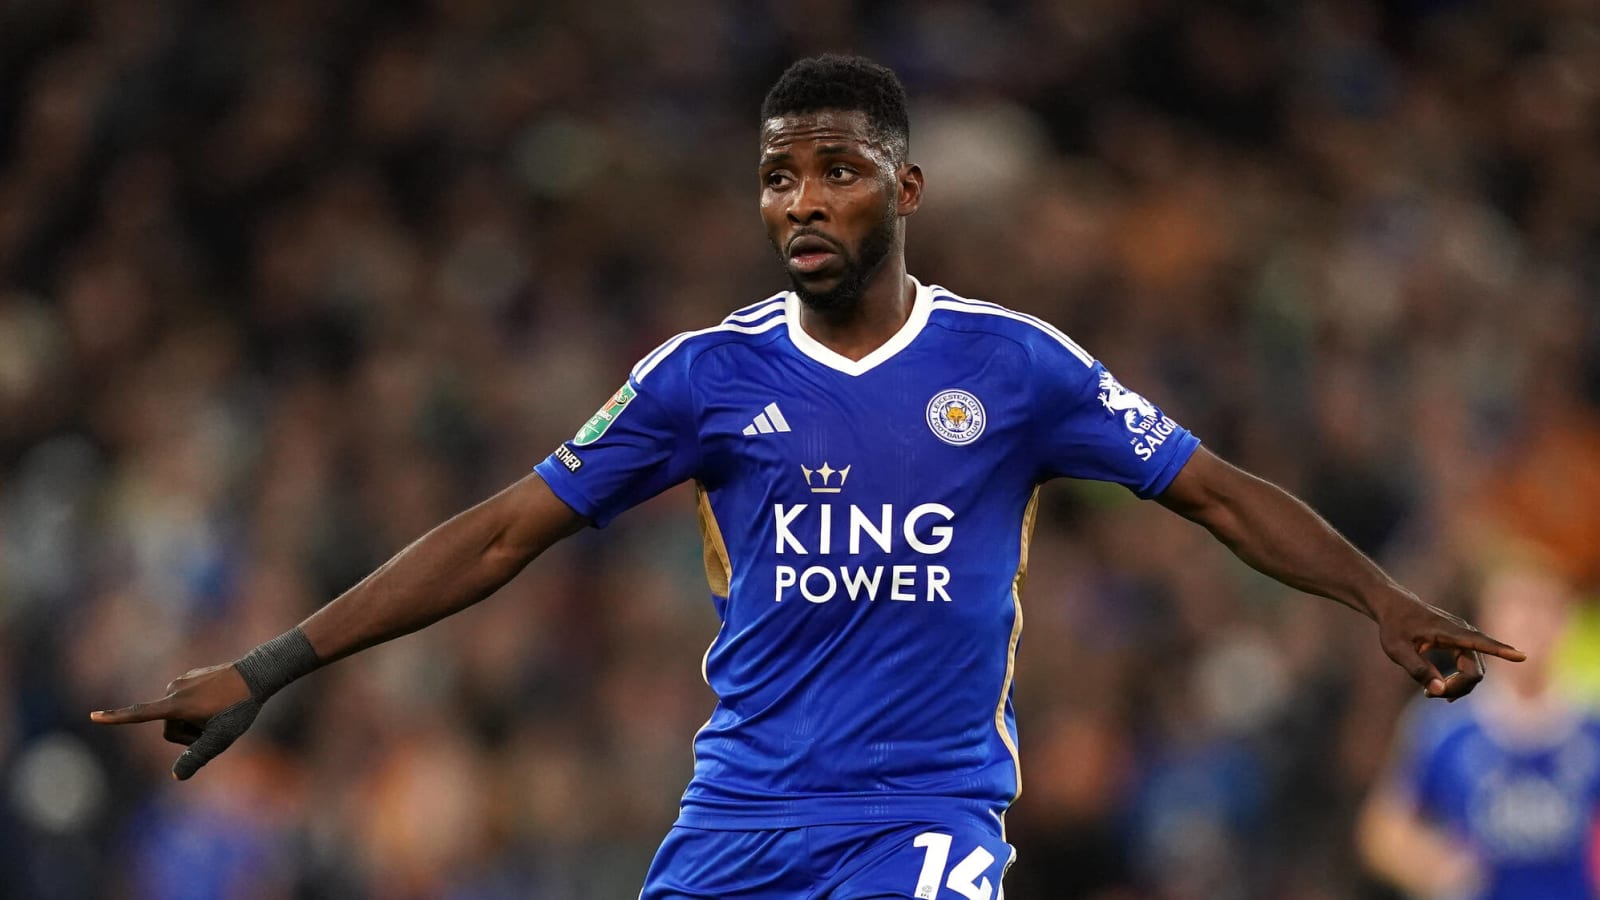 Crystal Palace one of three Premier League clubs in race to sign Leicester City star